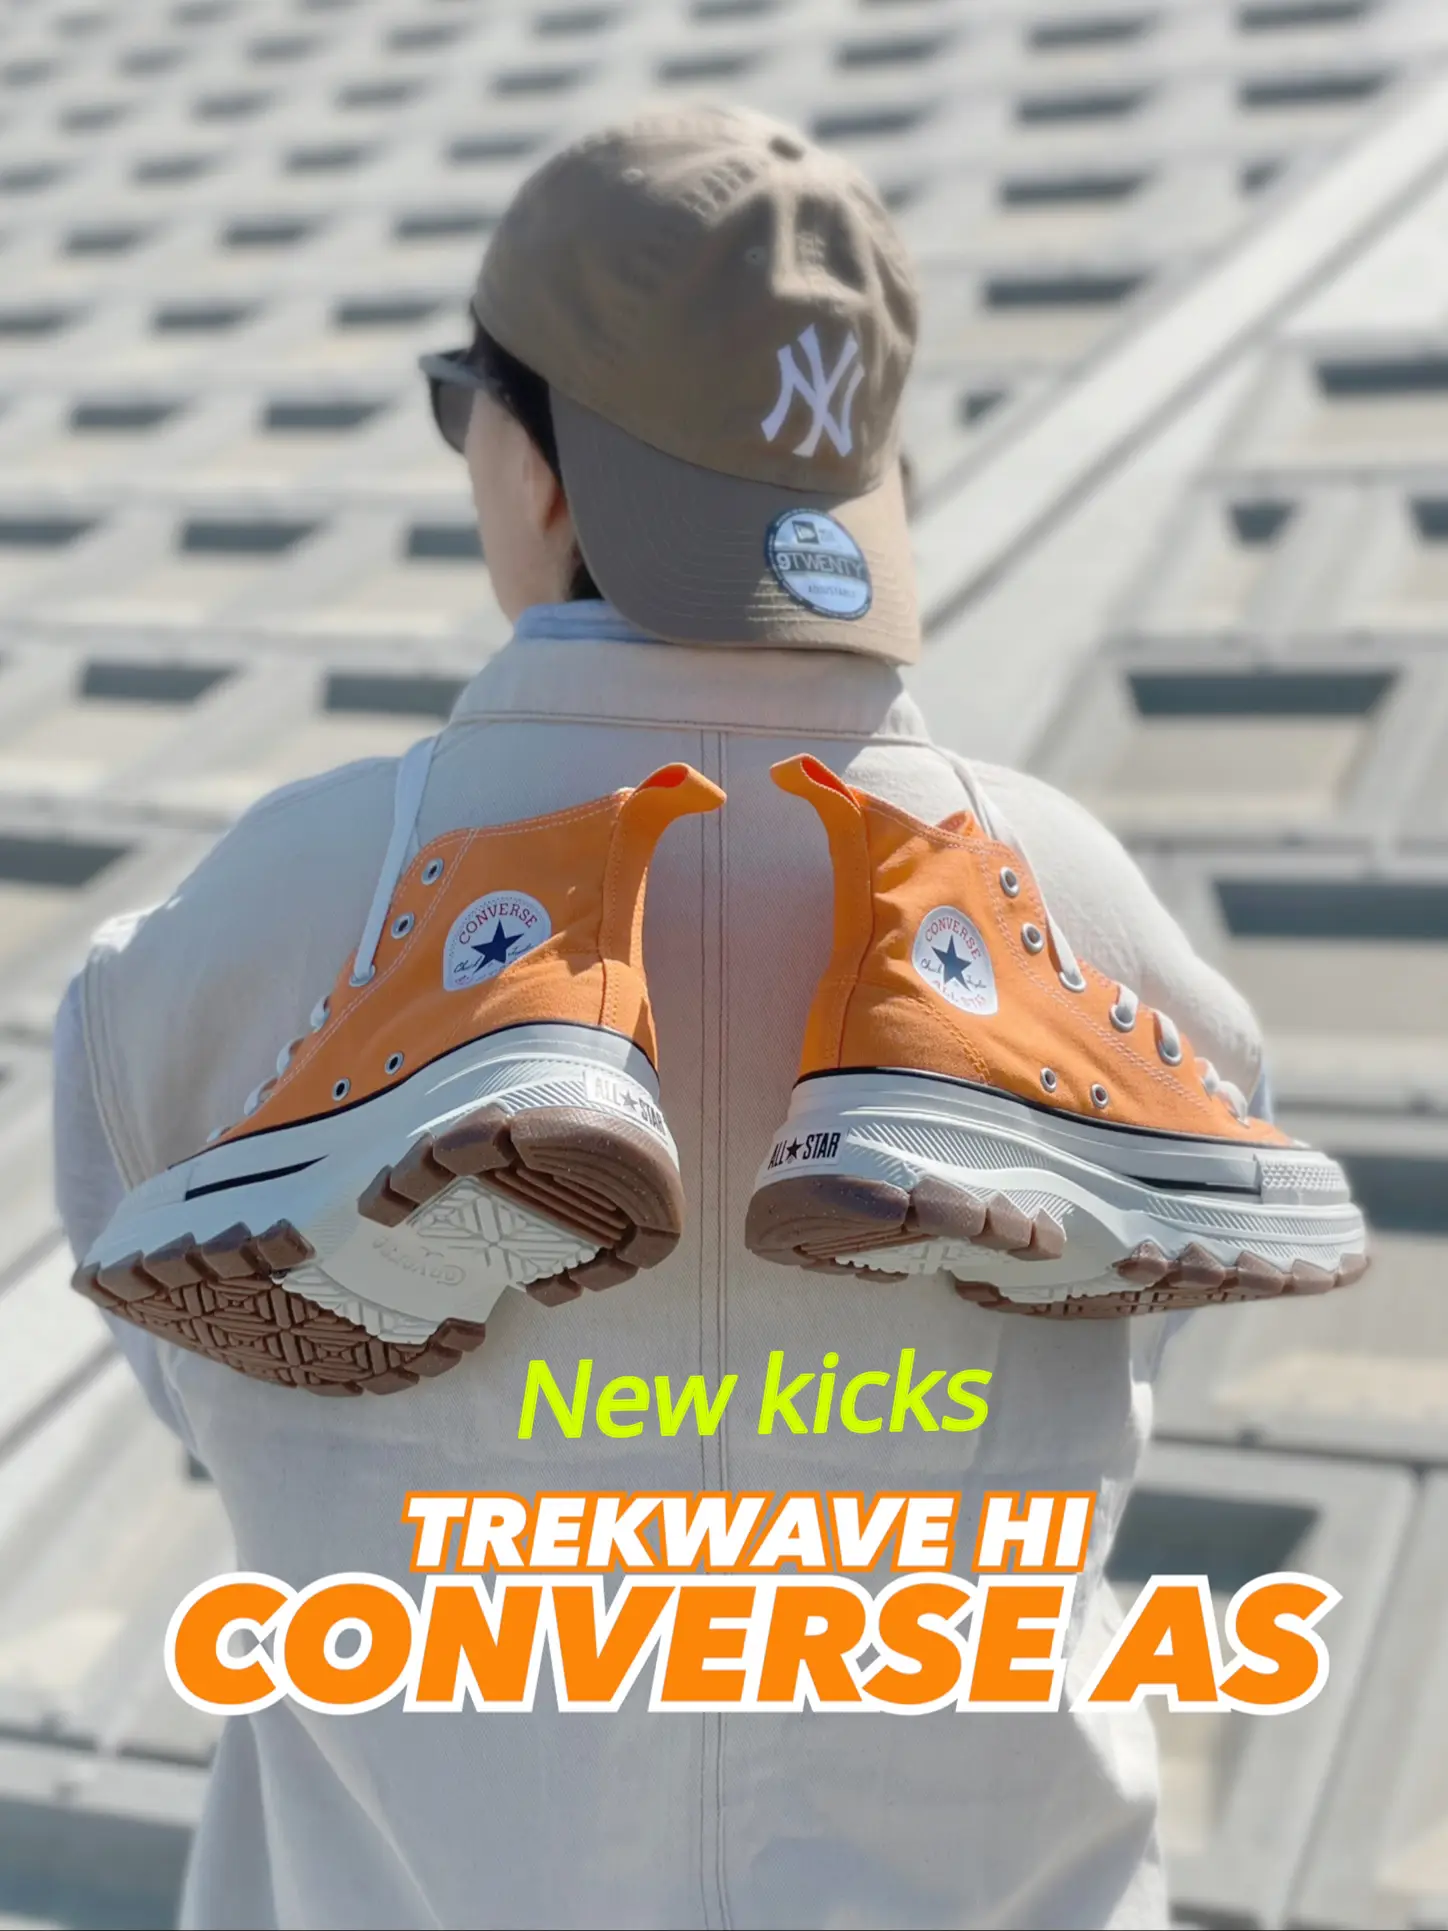 New kicks ‼️CONVERSE AS (R) TREKWAVE HI | Gallery posted by Ma